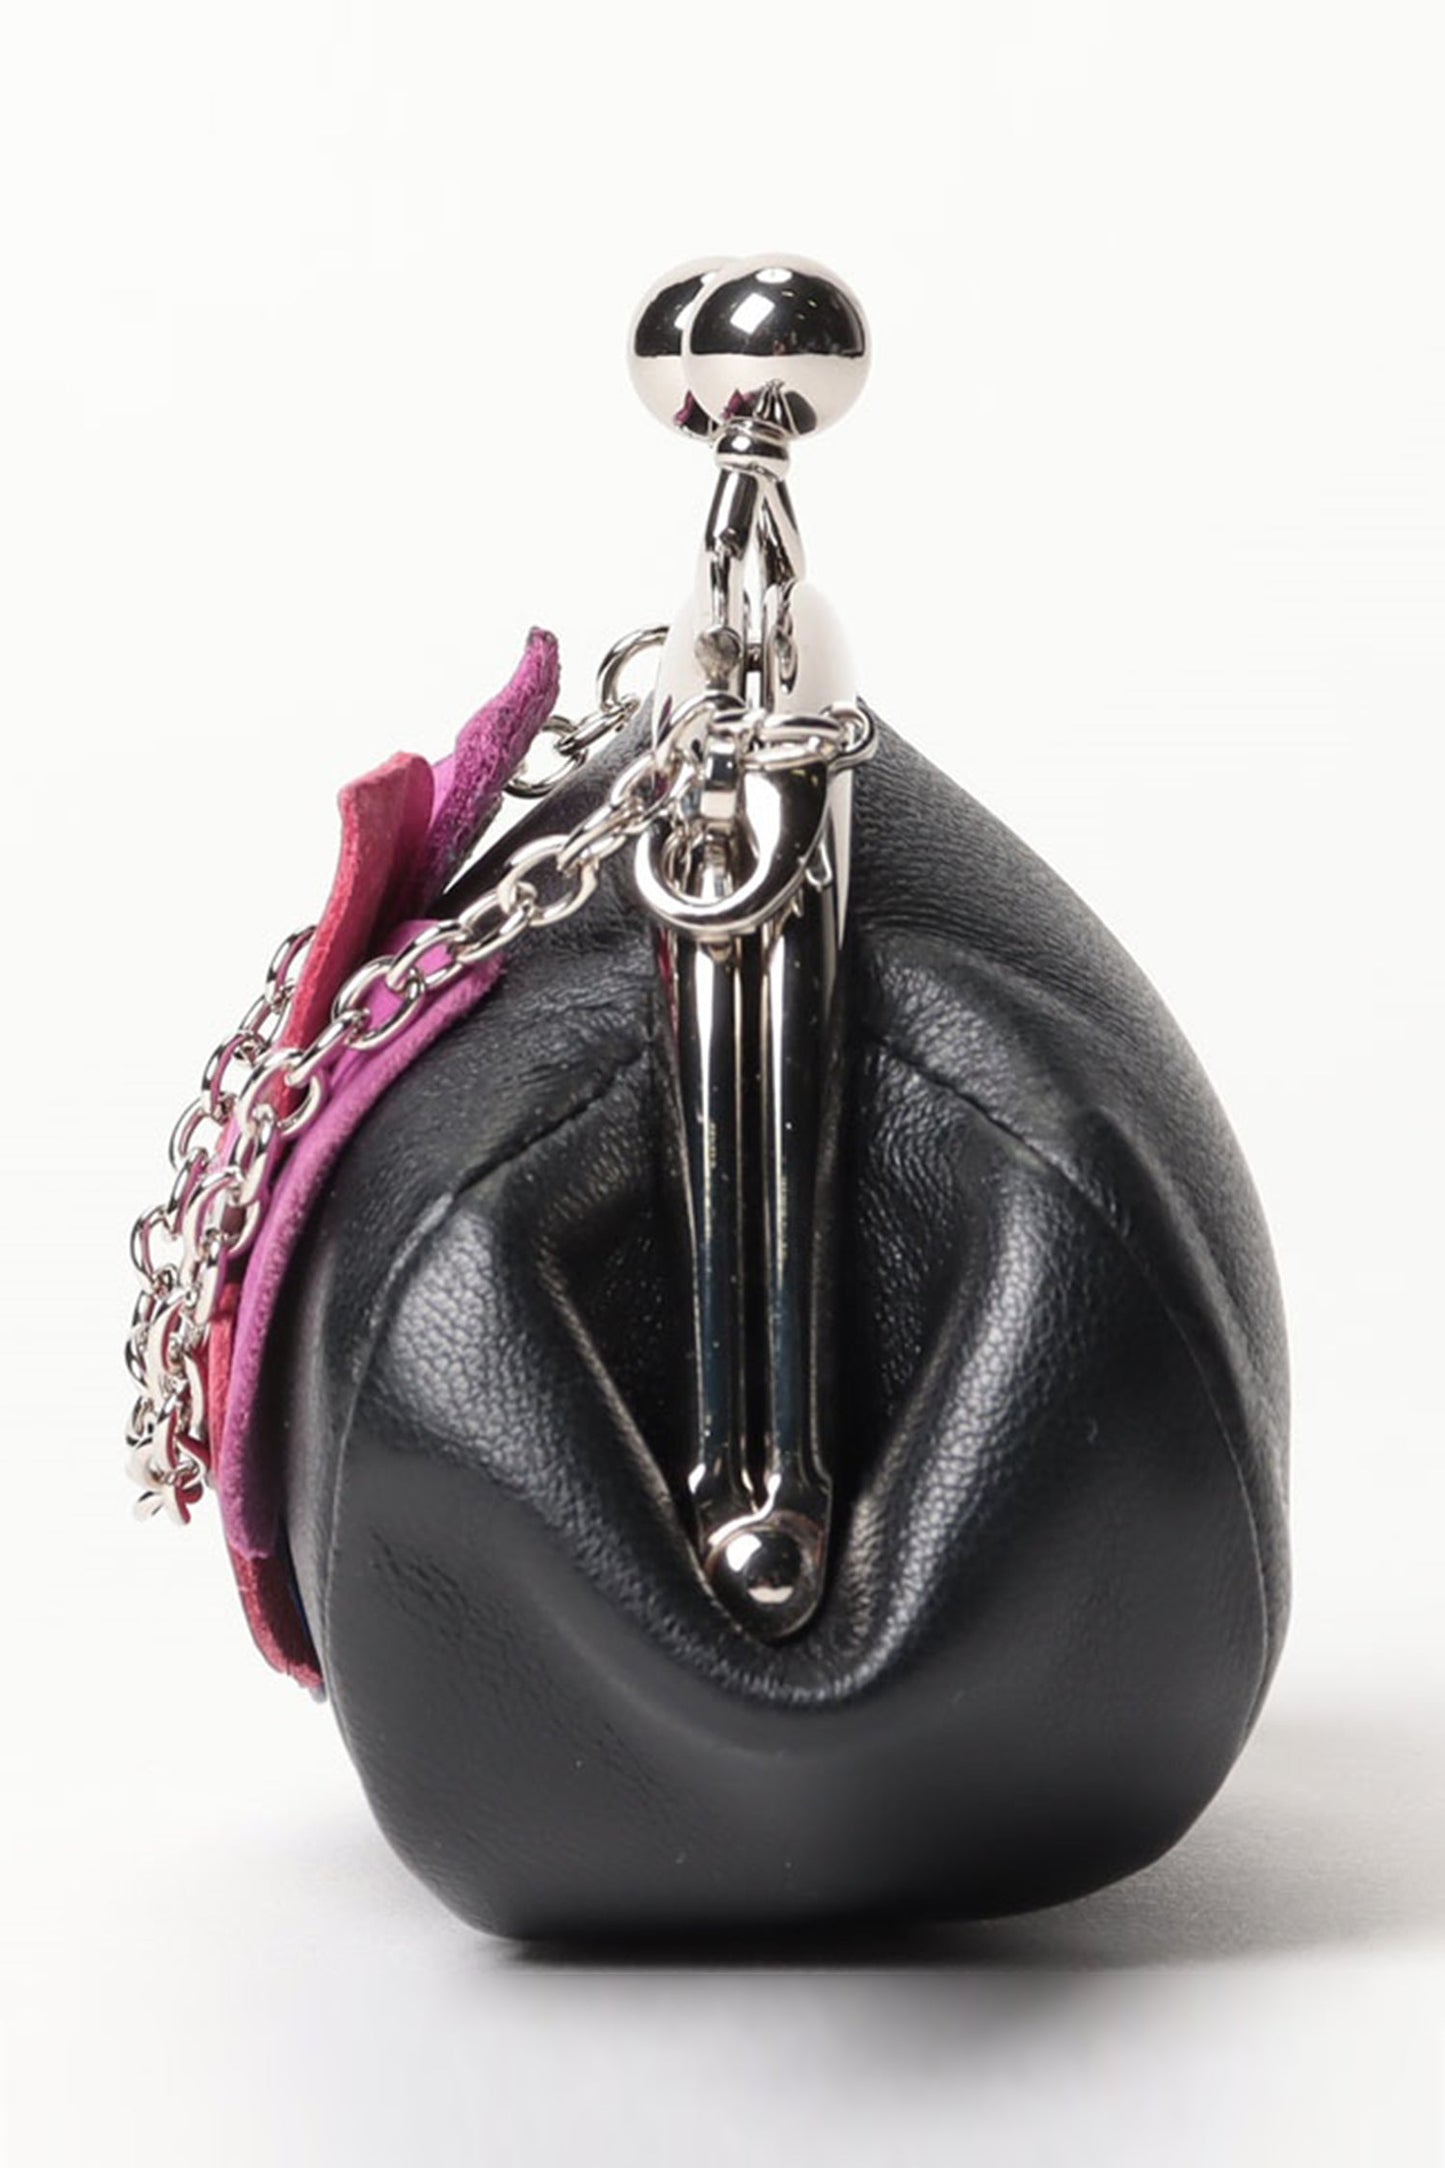 Candy Charm Mini Purse Black, silver chain, and big Clasp with articulation in middle